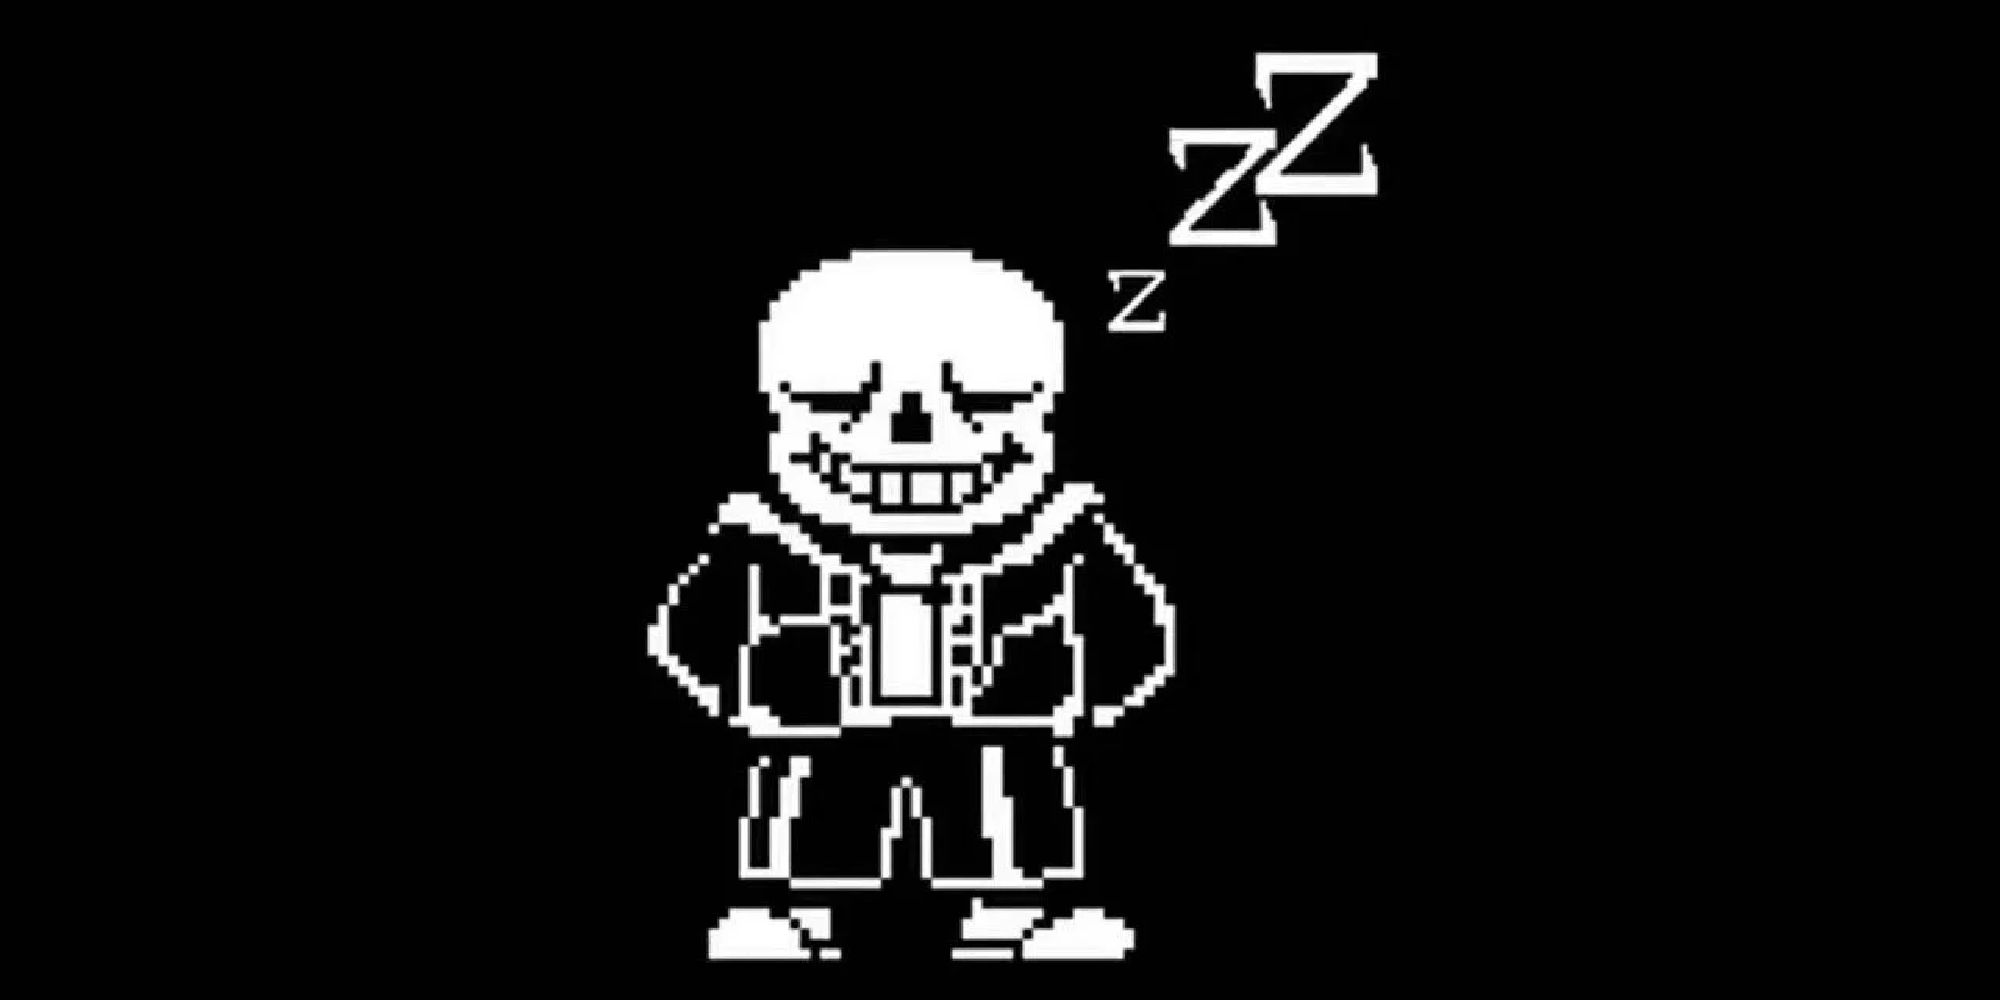 Sans sleeps with his hands in his pockets in Undertale